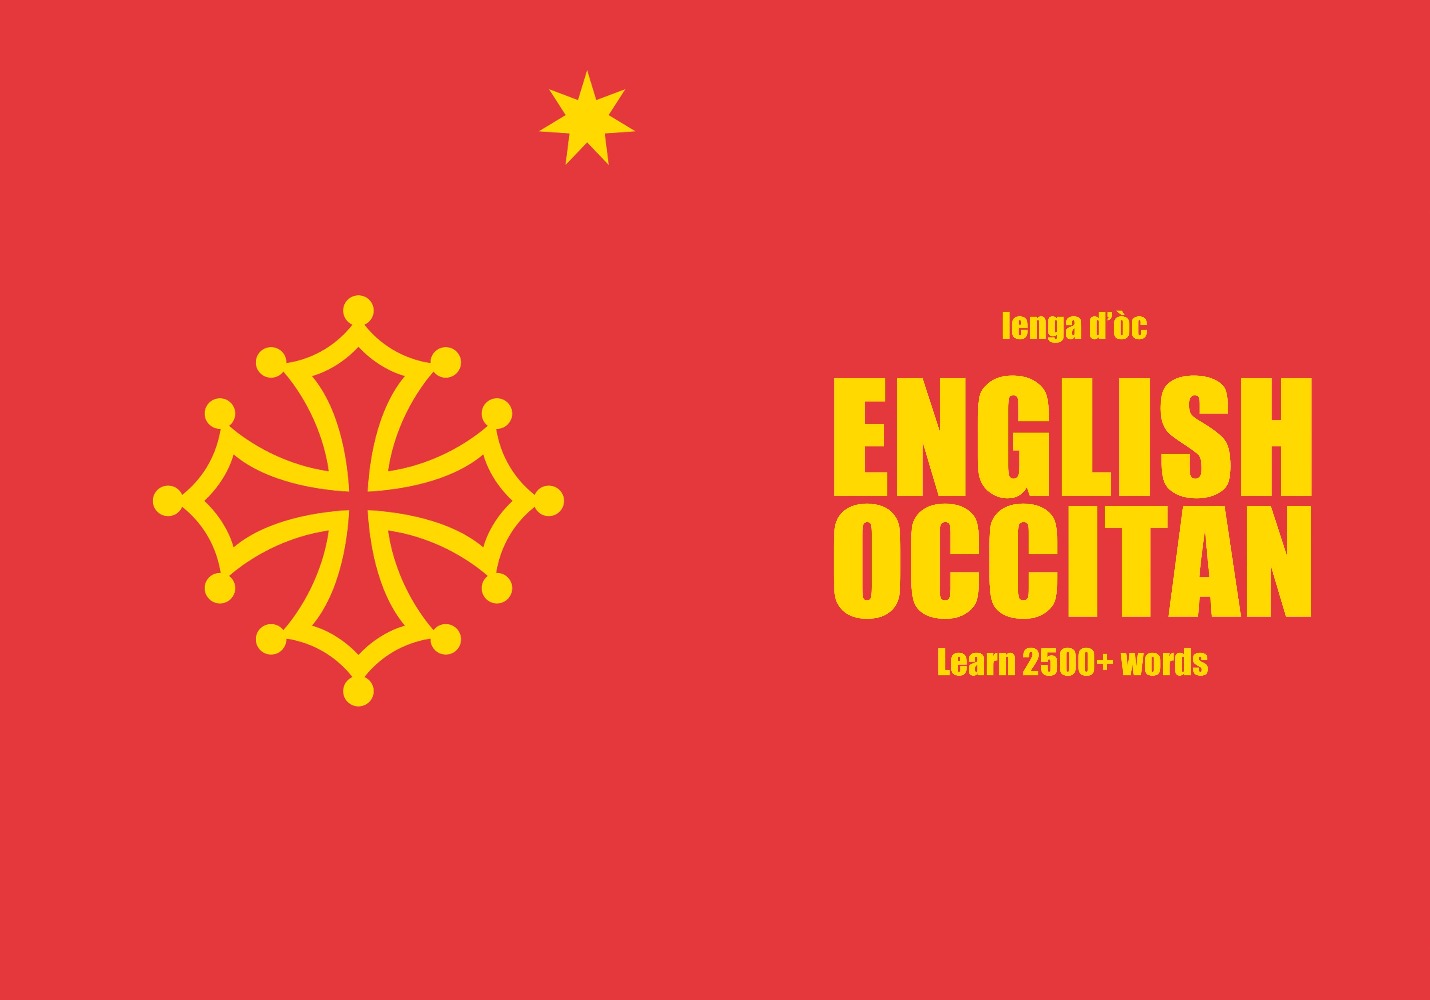 Occitan language learning notebook cover